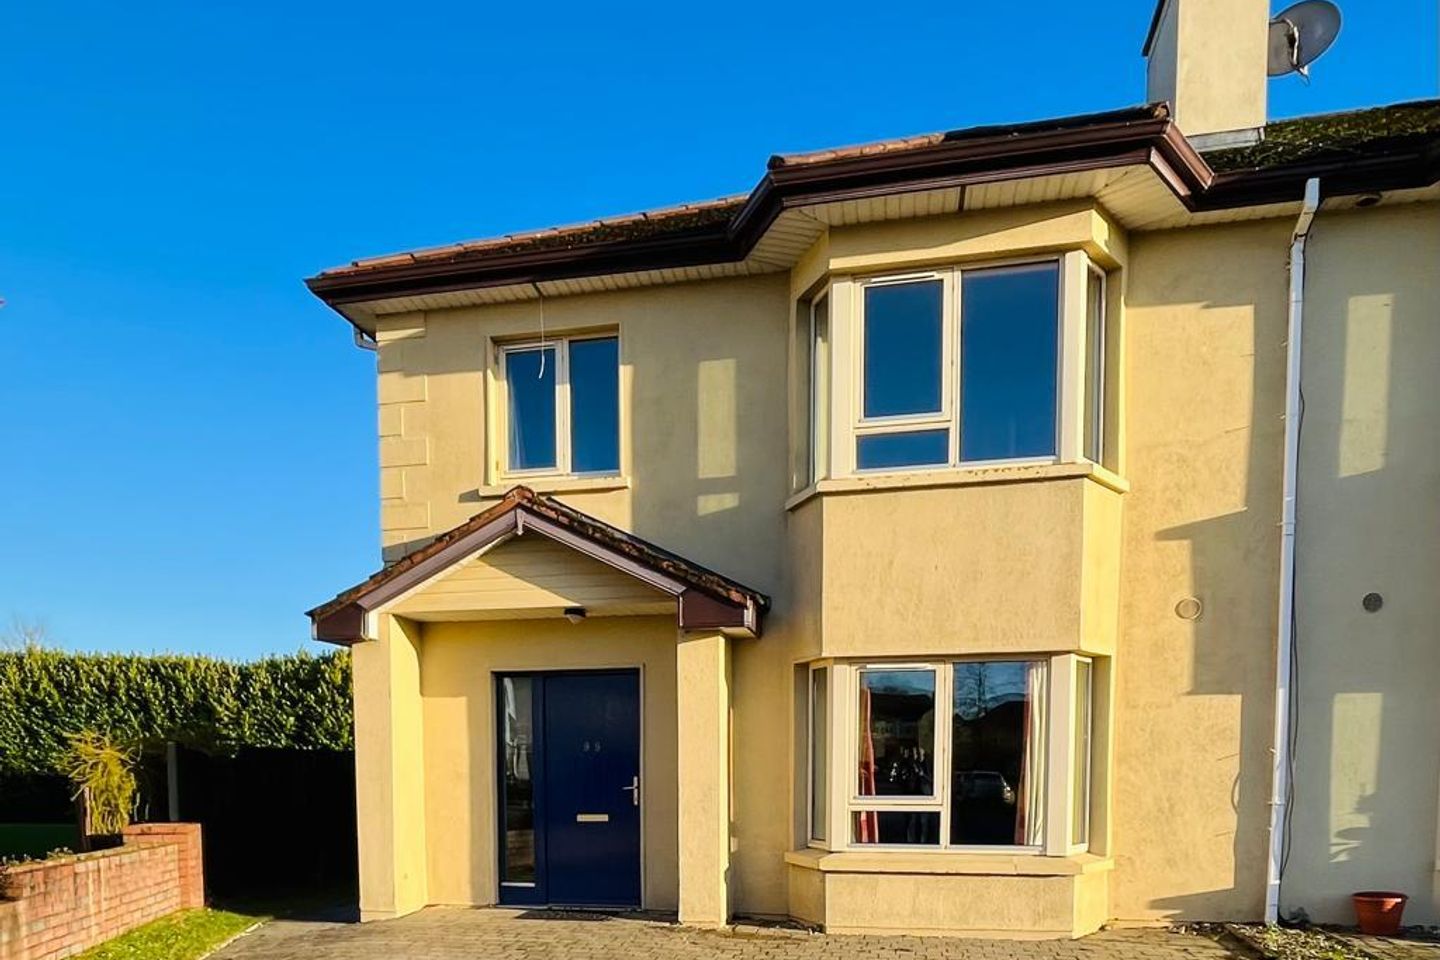 99 Abbeyville, Galway Road, Roscommon Town, Co. Roscommon